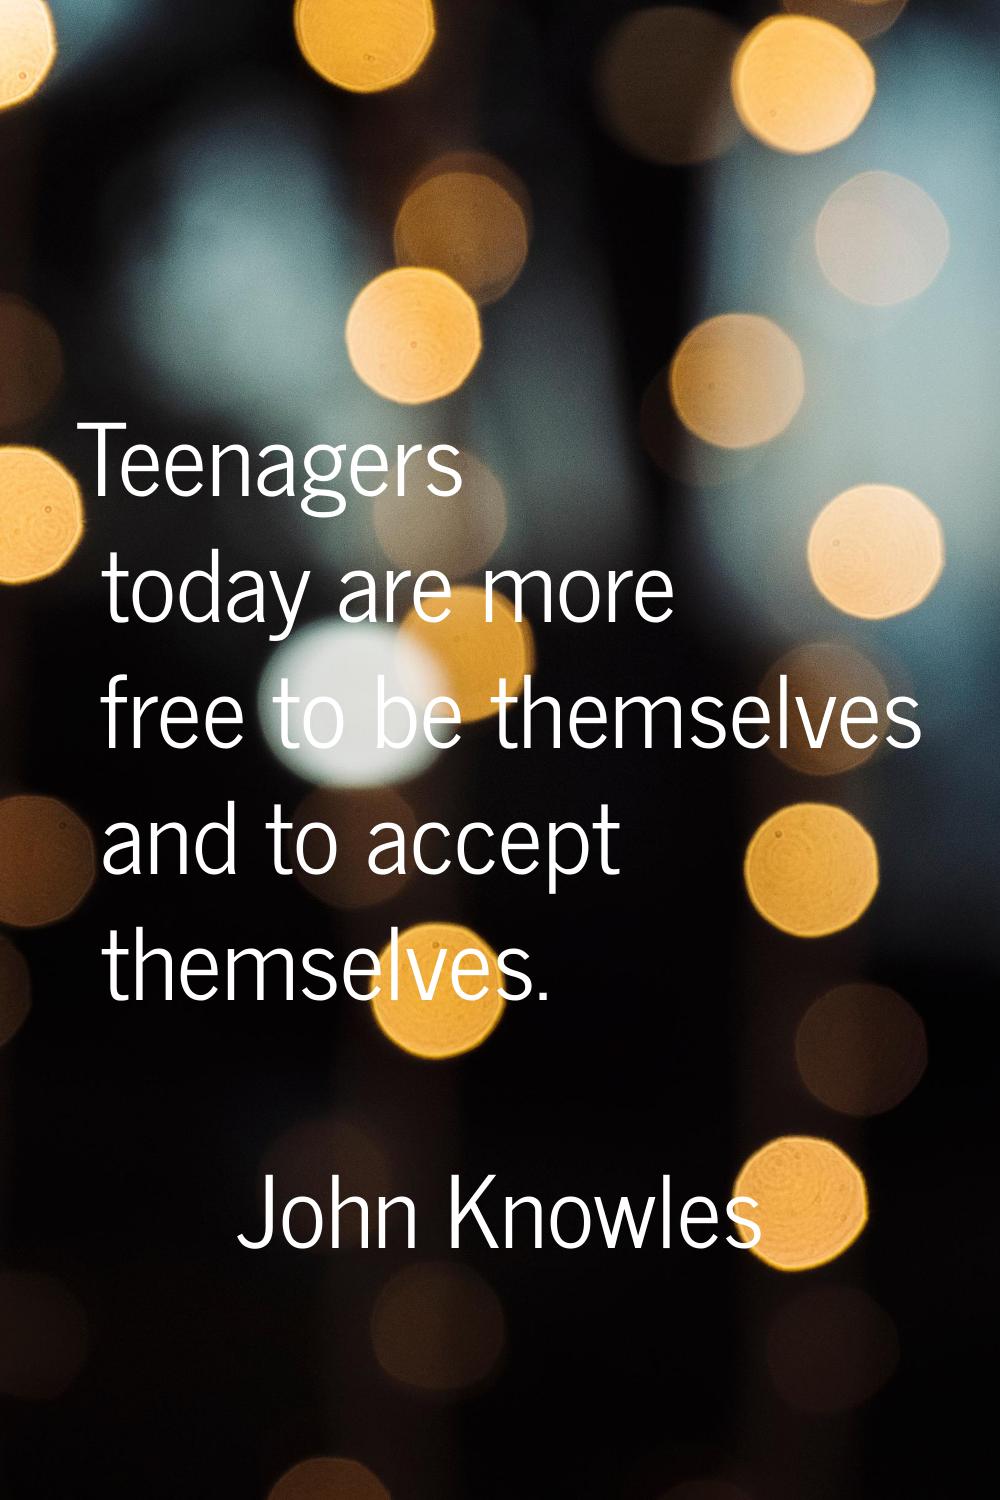 Teenagers today are more free to be themselves and to accept themselves.